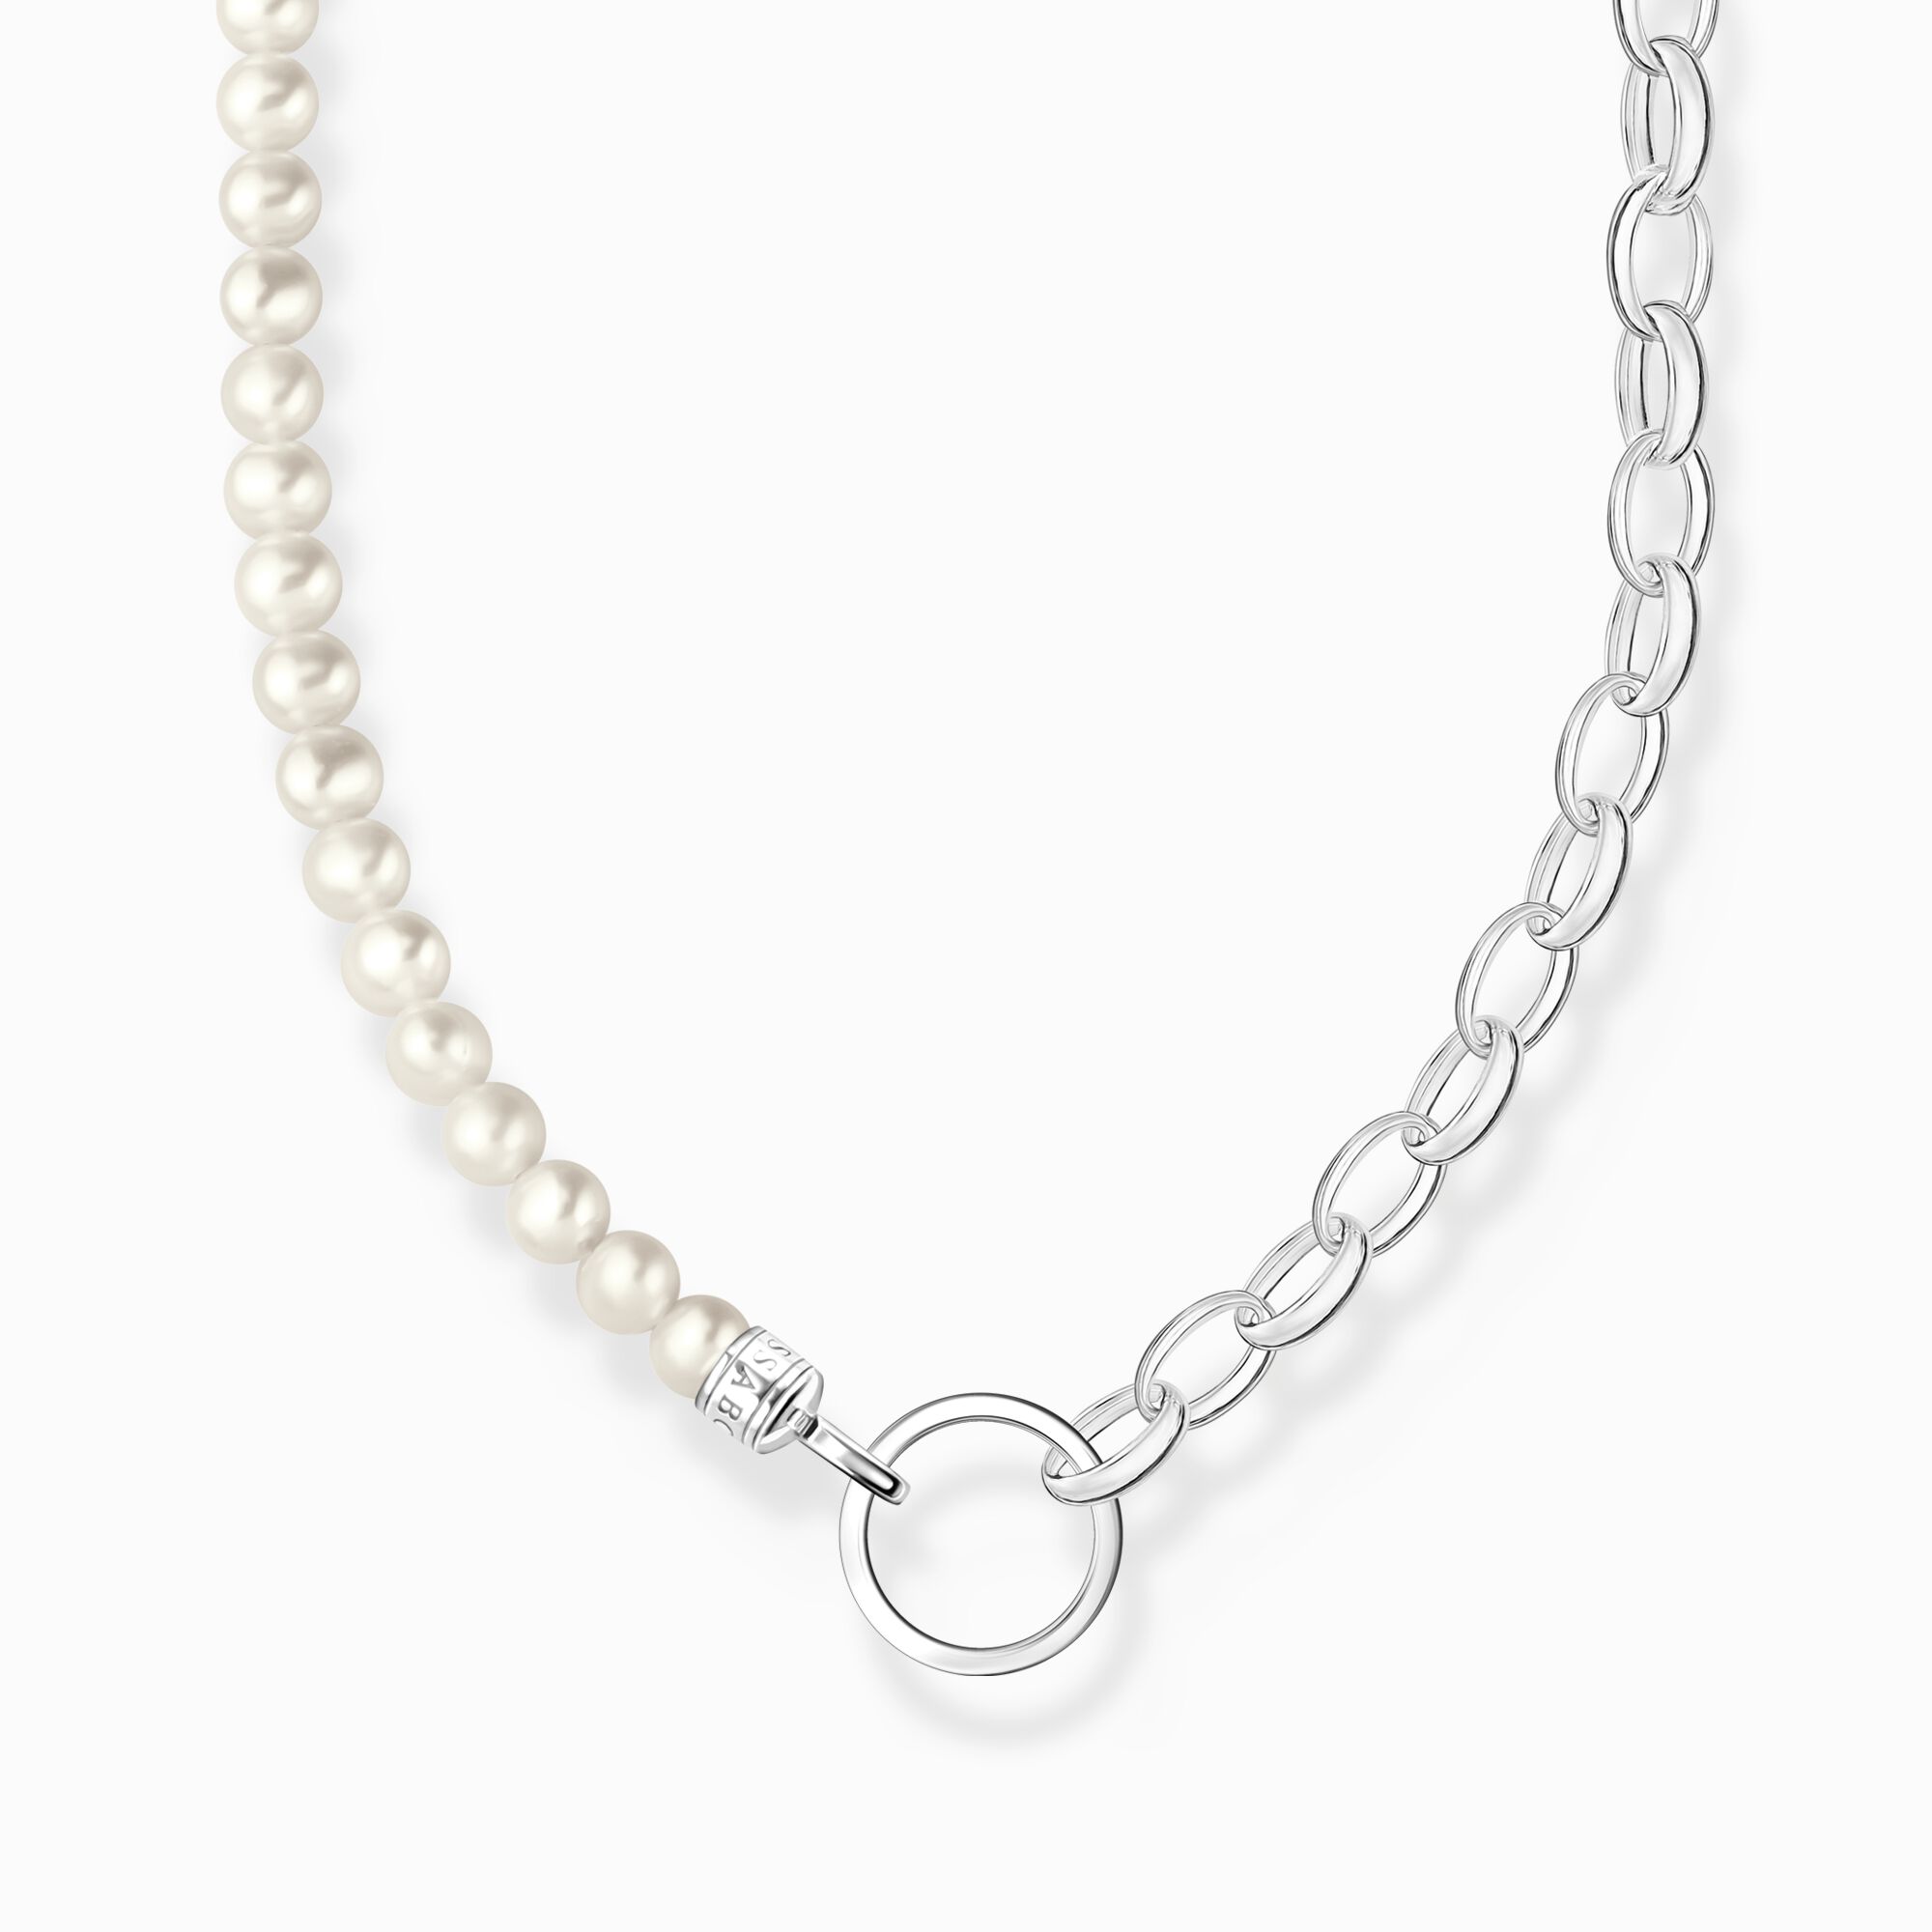 Charm necklace with white pearls and chain links silver from the Charm Club collection in the THOMAS SABO online store